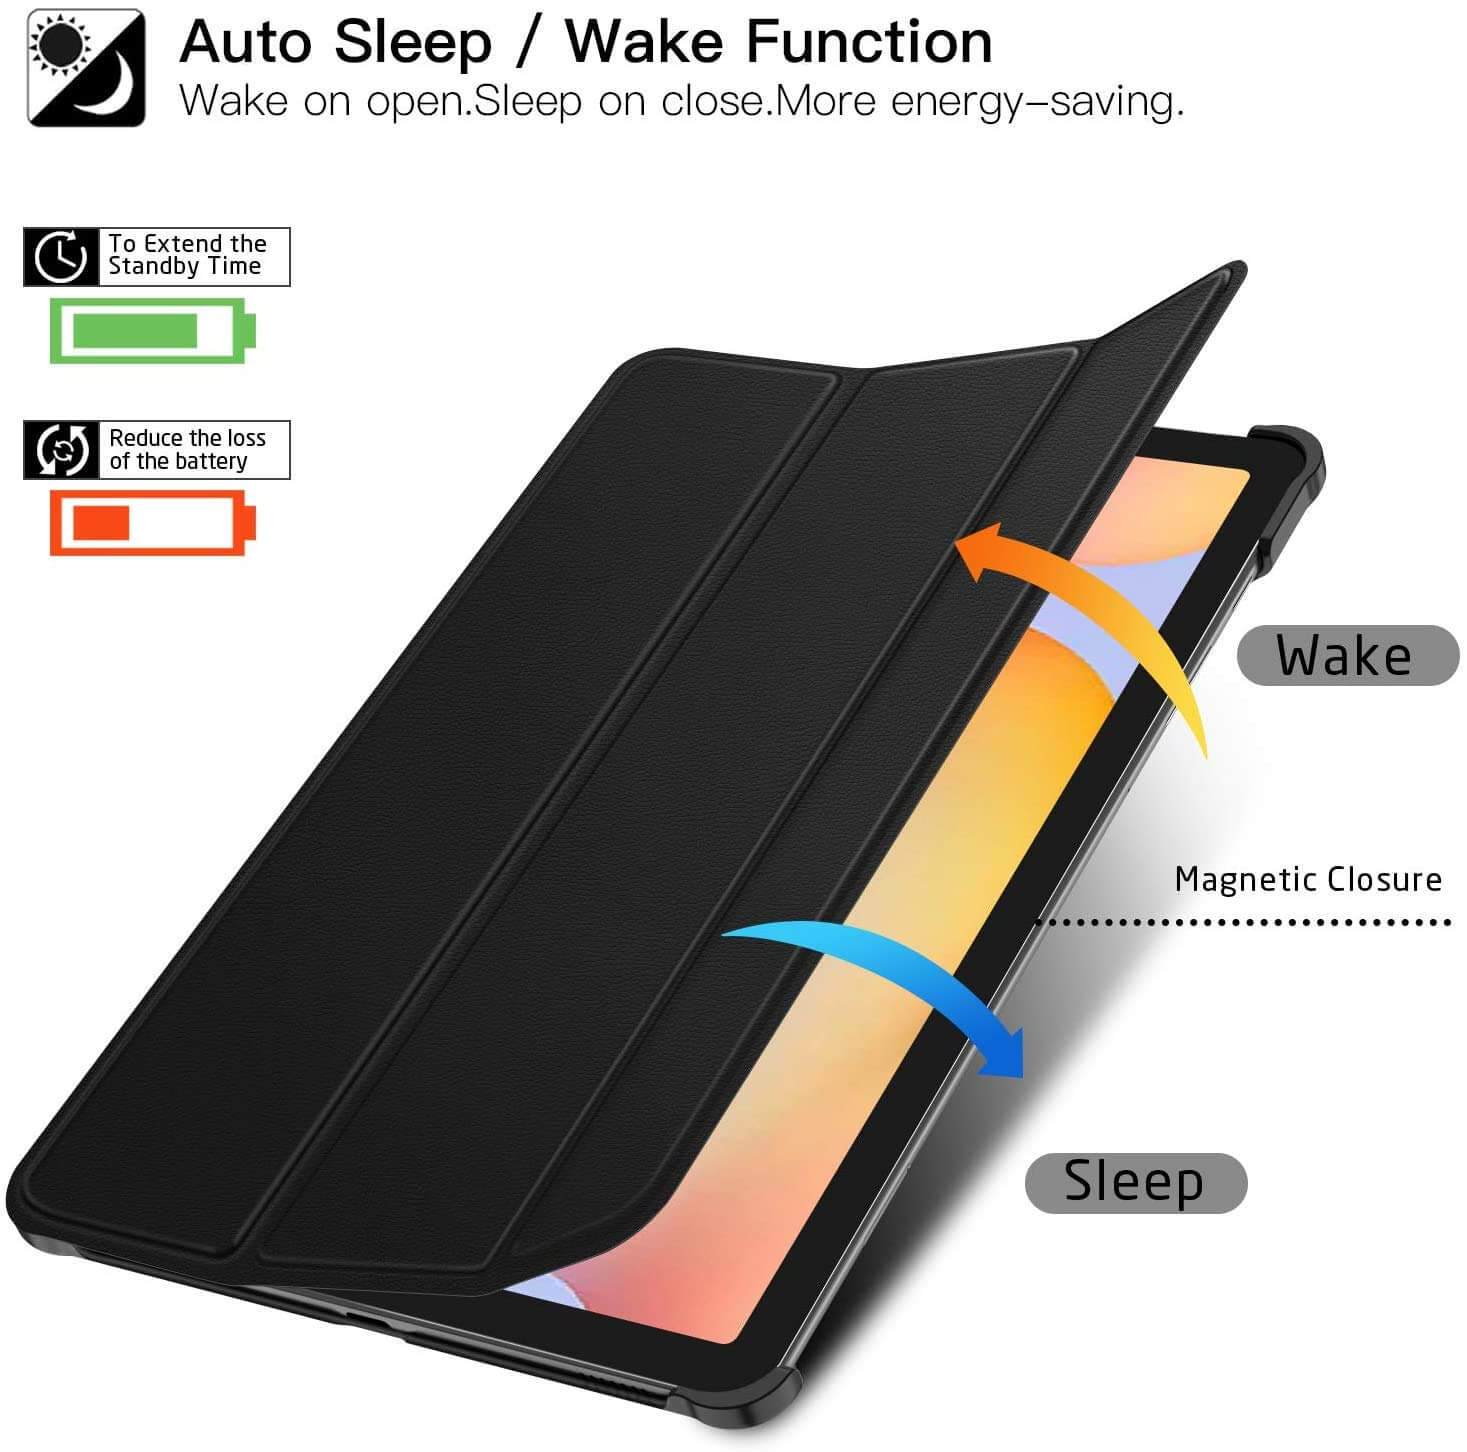 Premium Smart Cover For Samsung Galaxy Tab S6 Lite 2022 Trifold Case Black-Samsung Tablet Cases & Covers-First Help Tech